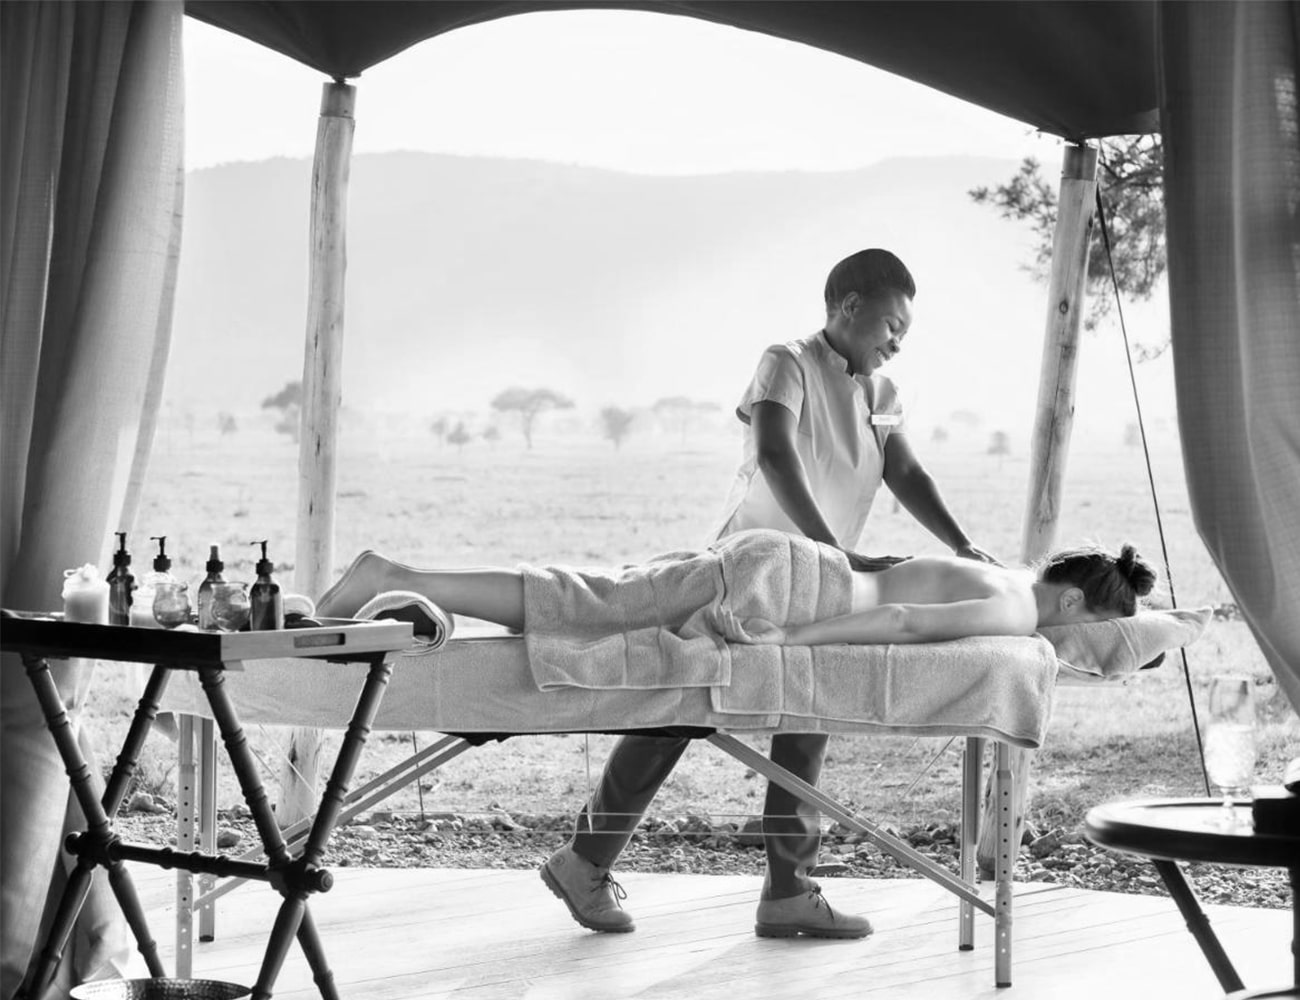 Guests Receiving Massages at One Nature Hotel and Resorts